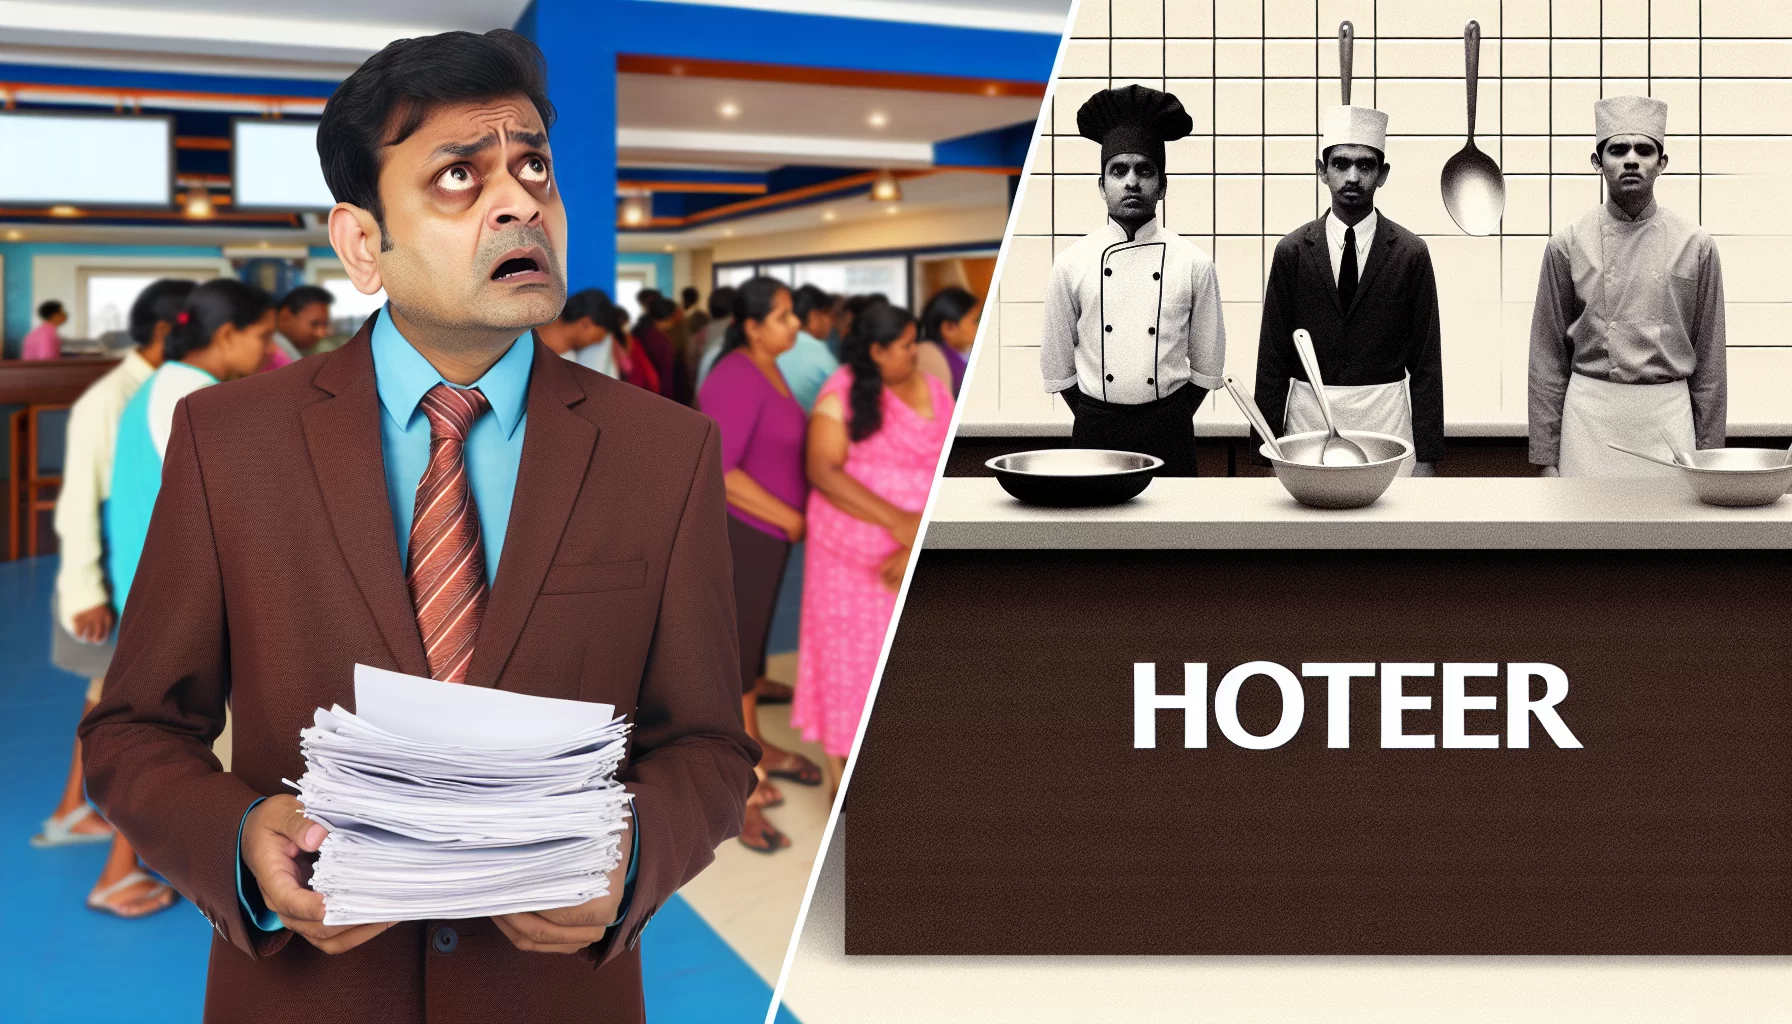 Addressing the alarming staffing crisis in the hotel industry